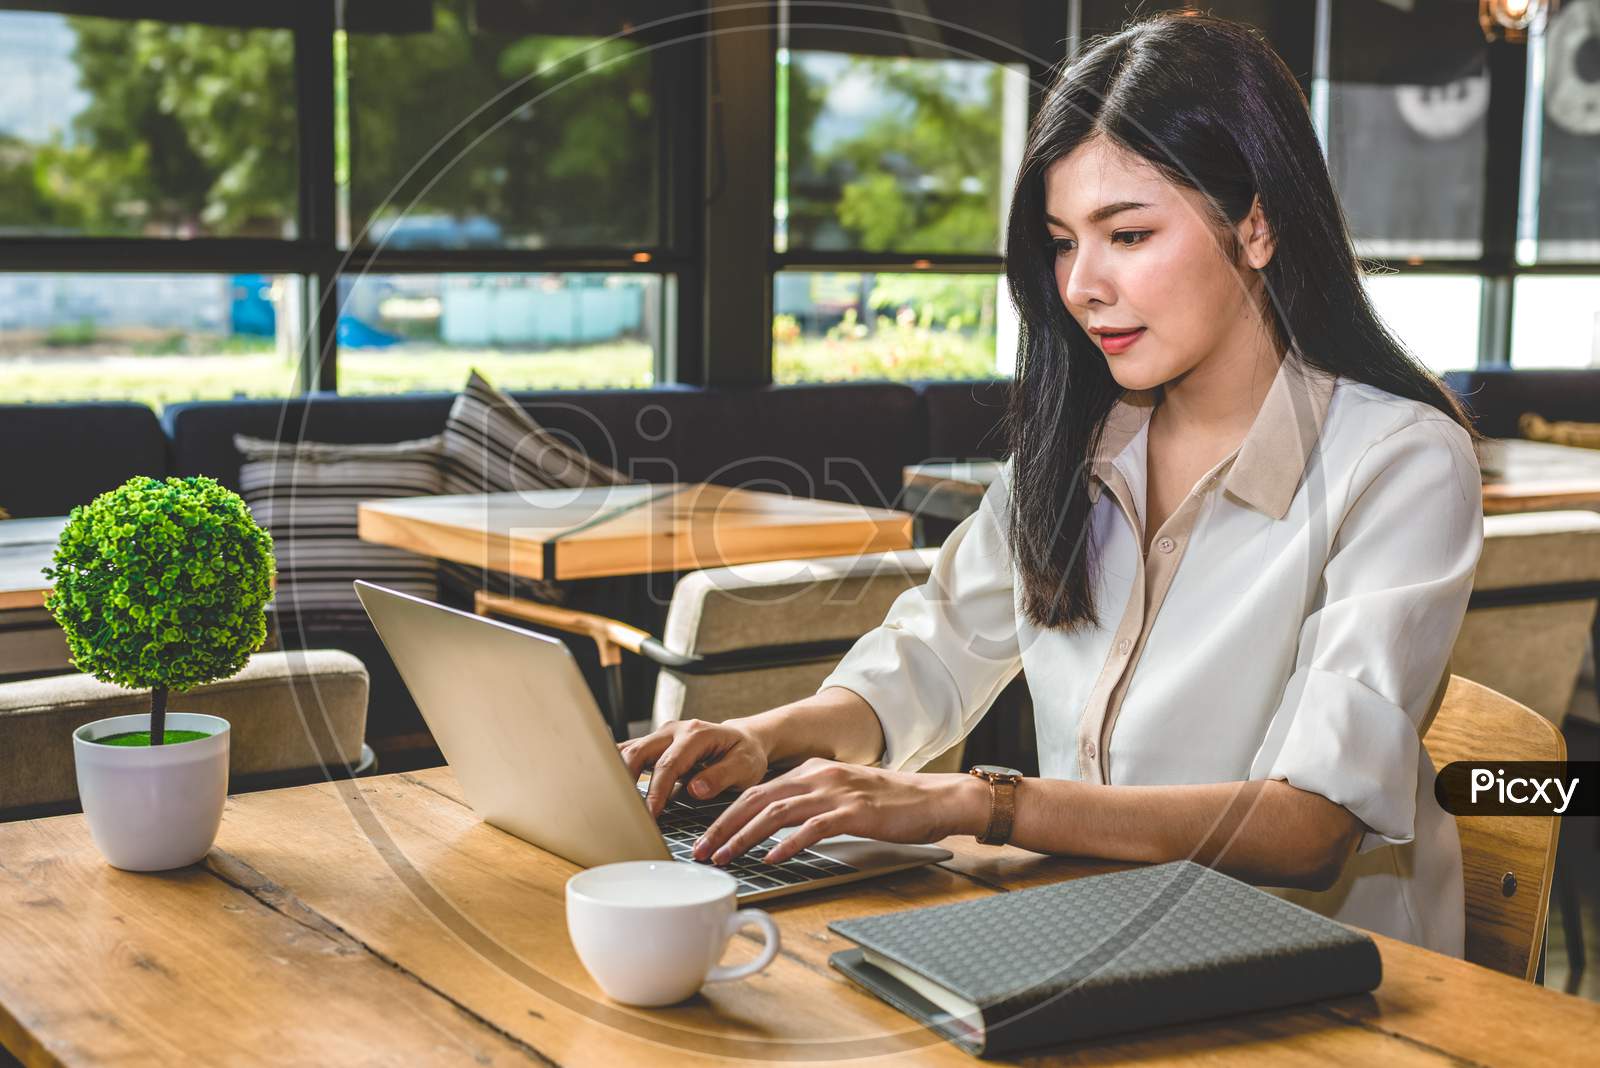 Asian Woman Working With Laptop In Coffee Shop. People And Lifestyles Concept. Job And Occupation Working And Freelance Theme.